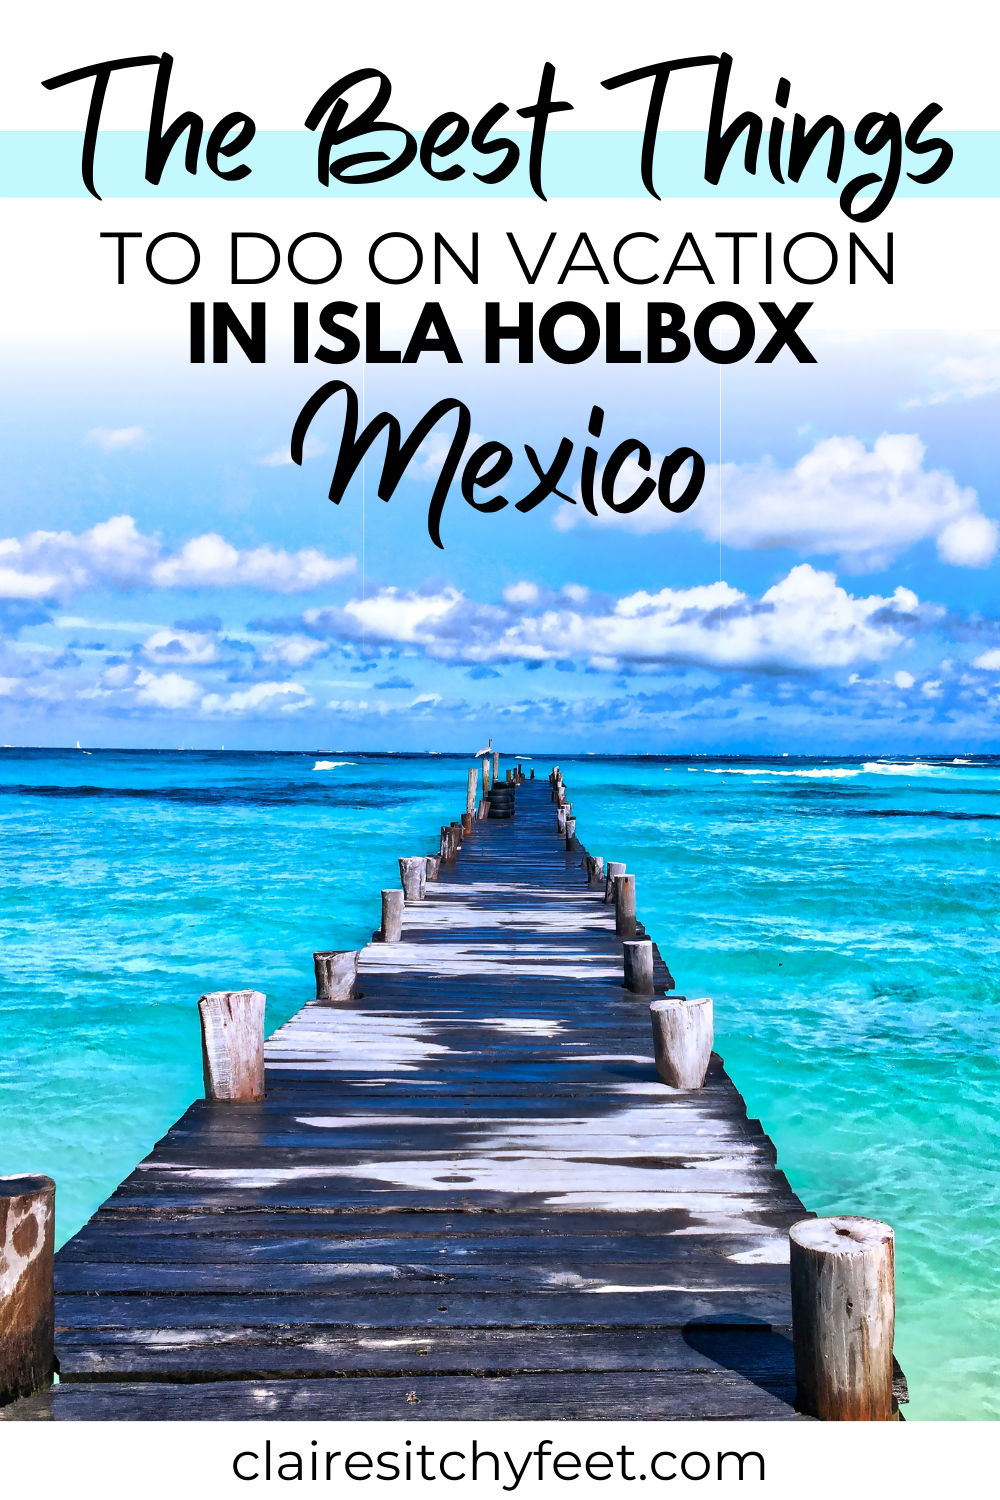 The Best Things To Do In Isla Holbox